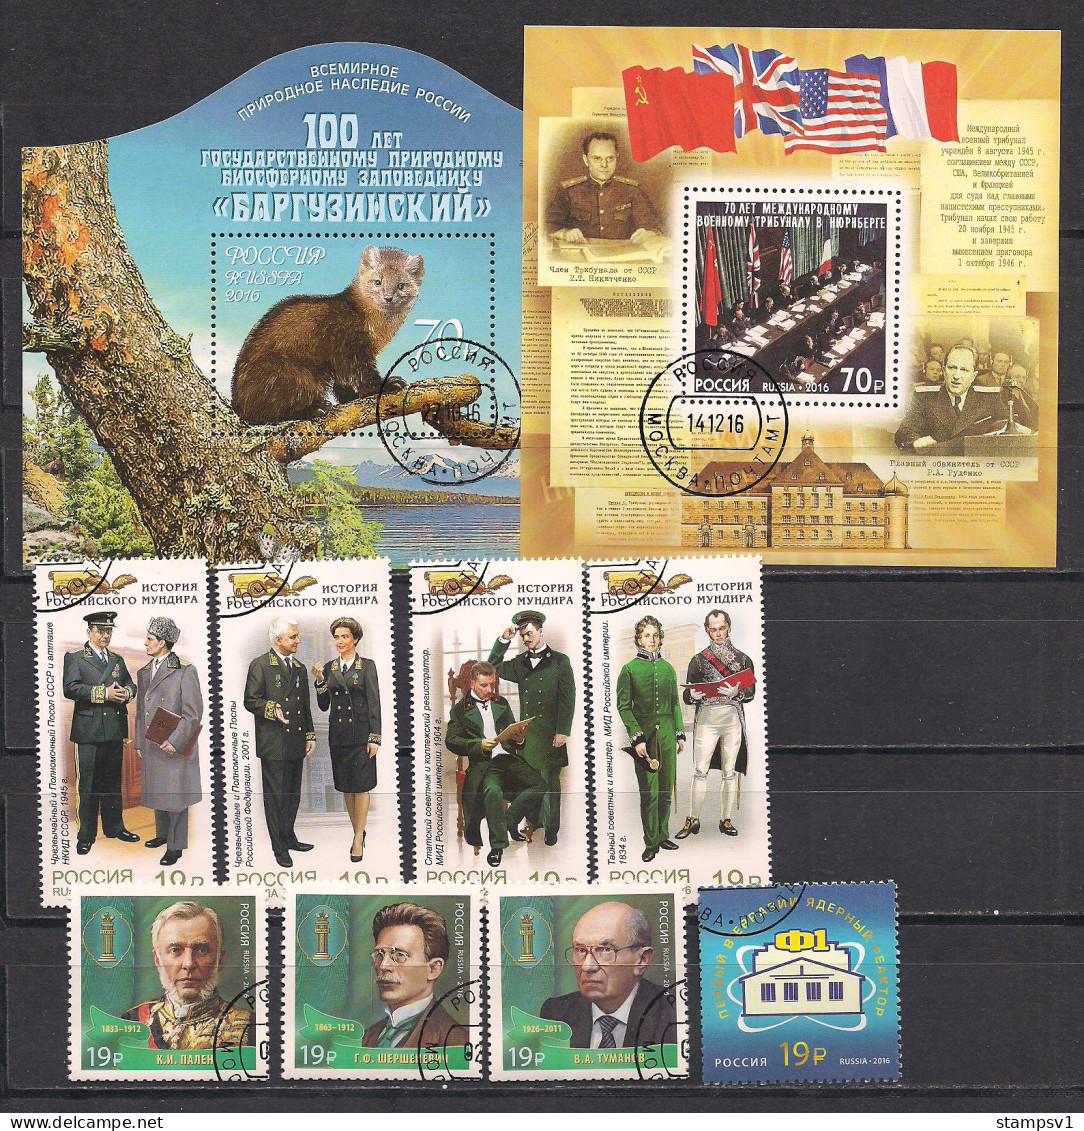 Russia 2016 Year Set. 3 Sheets + 11 Blocks + 87 Stamps.  Without Mi 2301,  Mi 2341 - Années Complètes